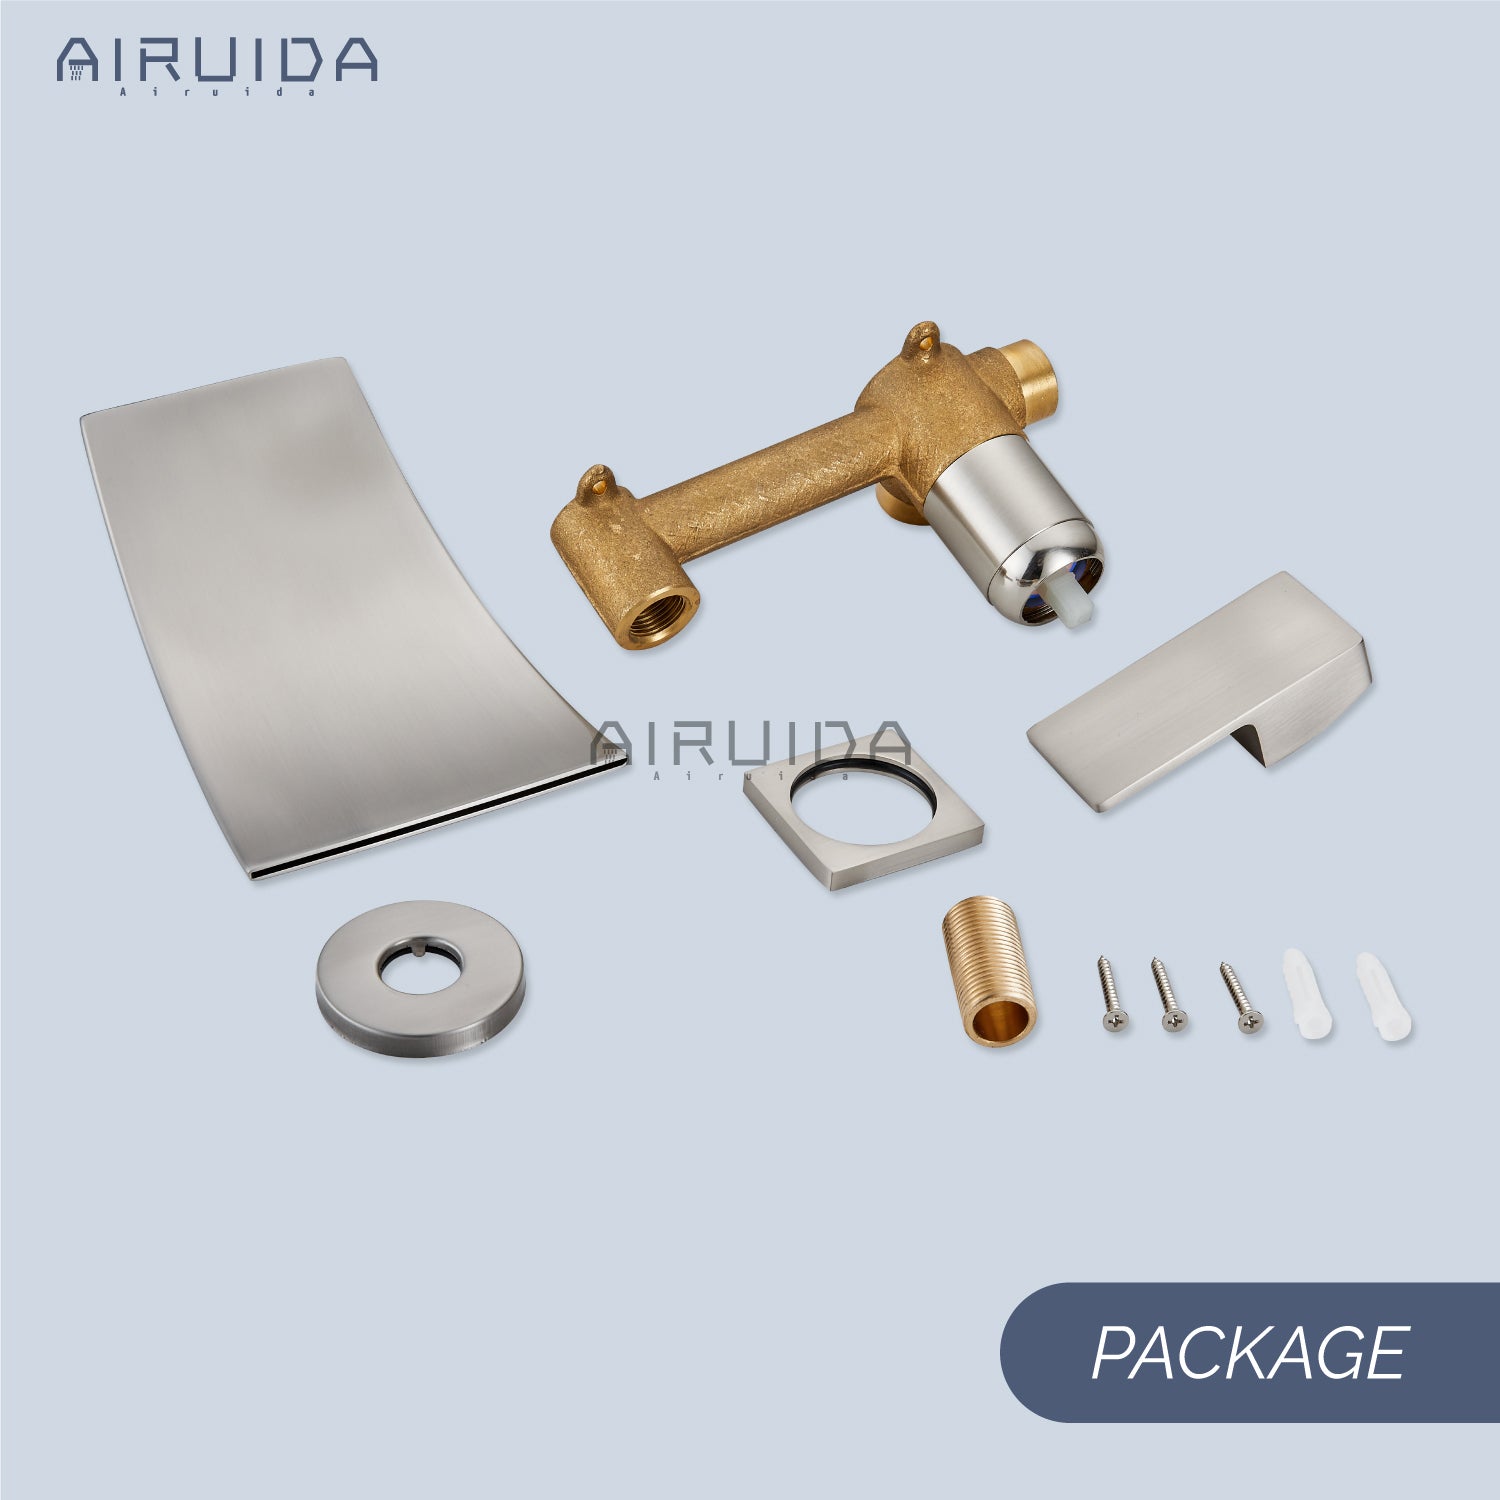 Airuida Wall Mount Wall Mount Bathtub Faucet, Tub Filler with Waterfall Tub Spout, Single Handle Bathroom Mixer Tap Brass Rough-in Valve Included